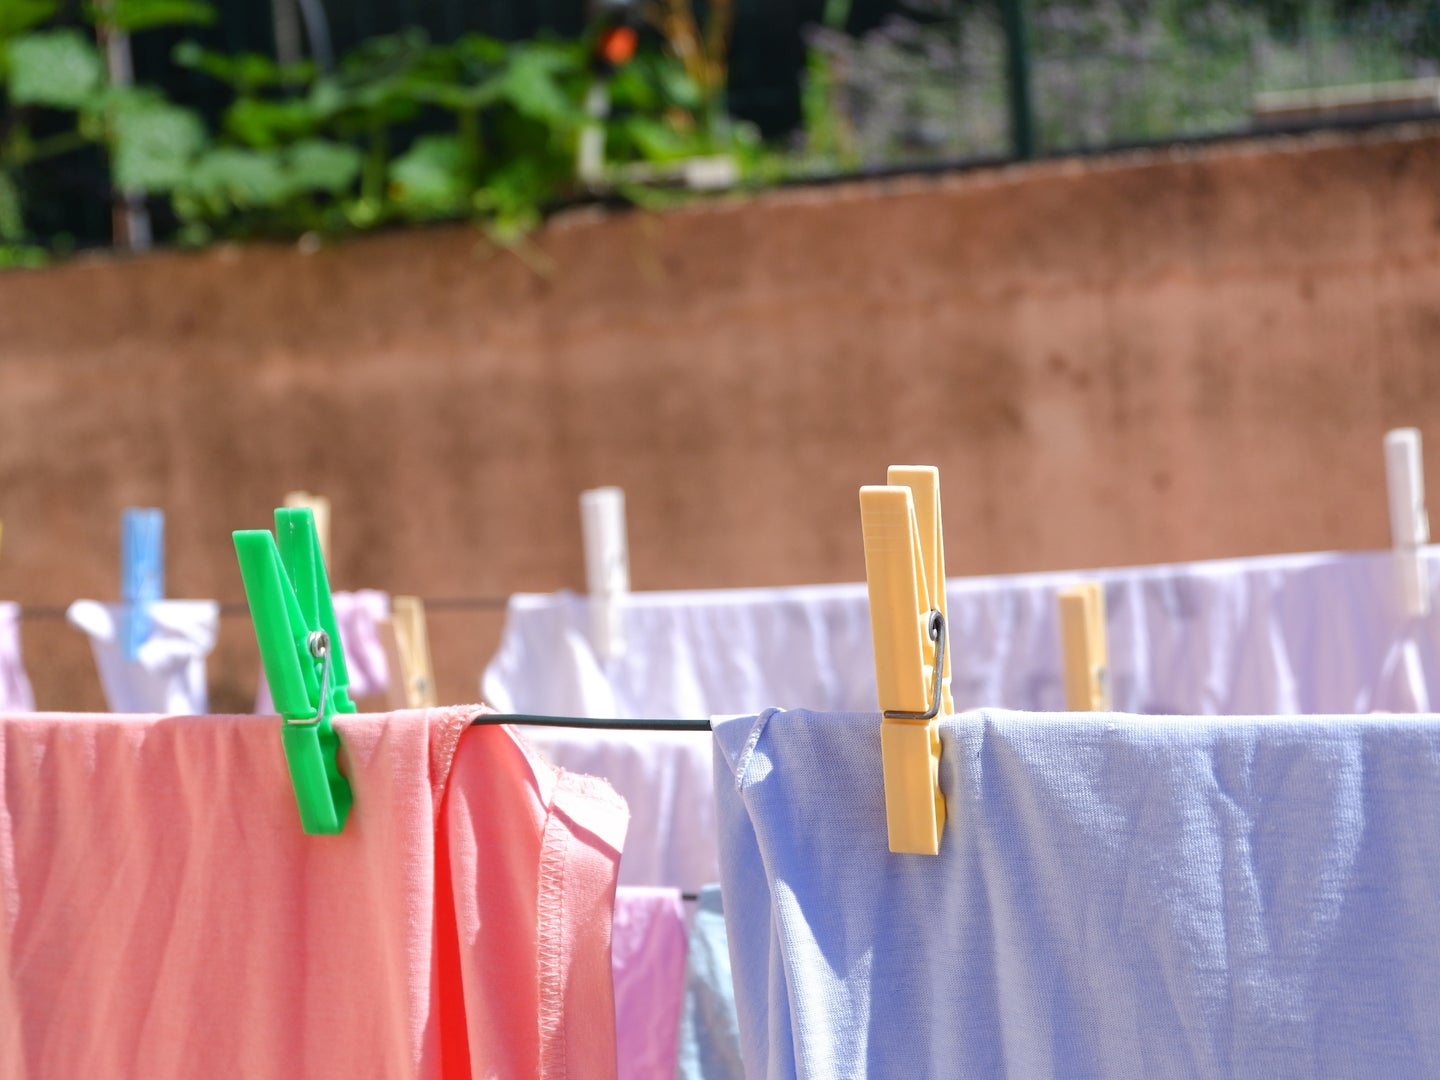 Colorful clothes hanging on a laundry line outside on a sunny day—one of the best ways to reduce microplastic pollution from laundry.